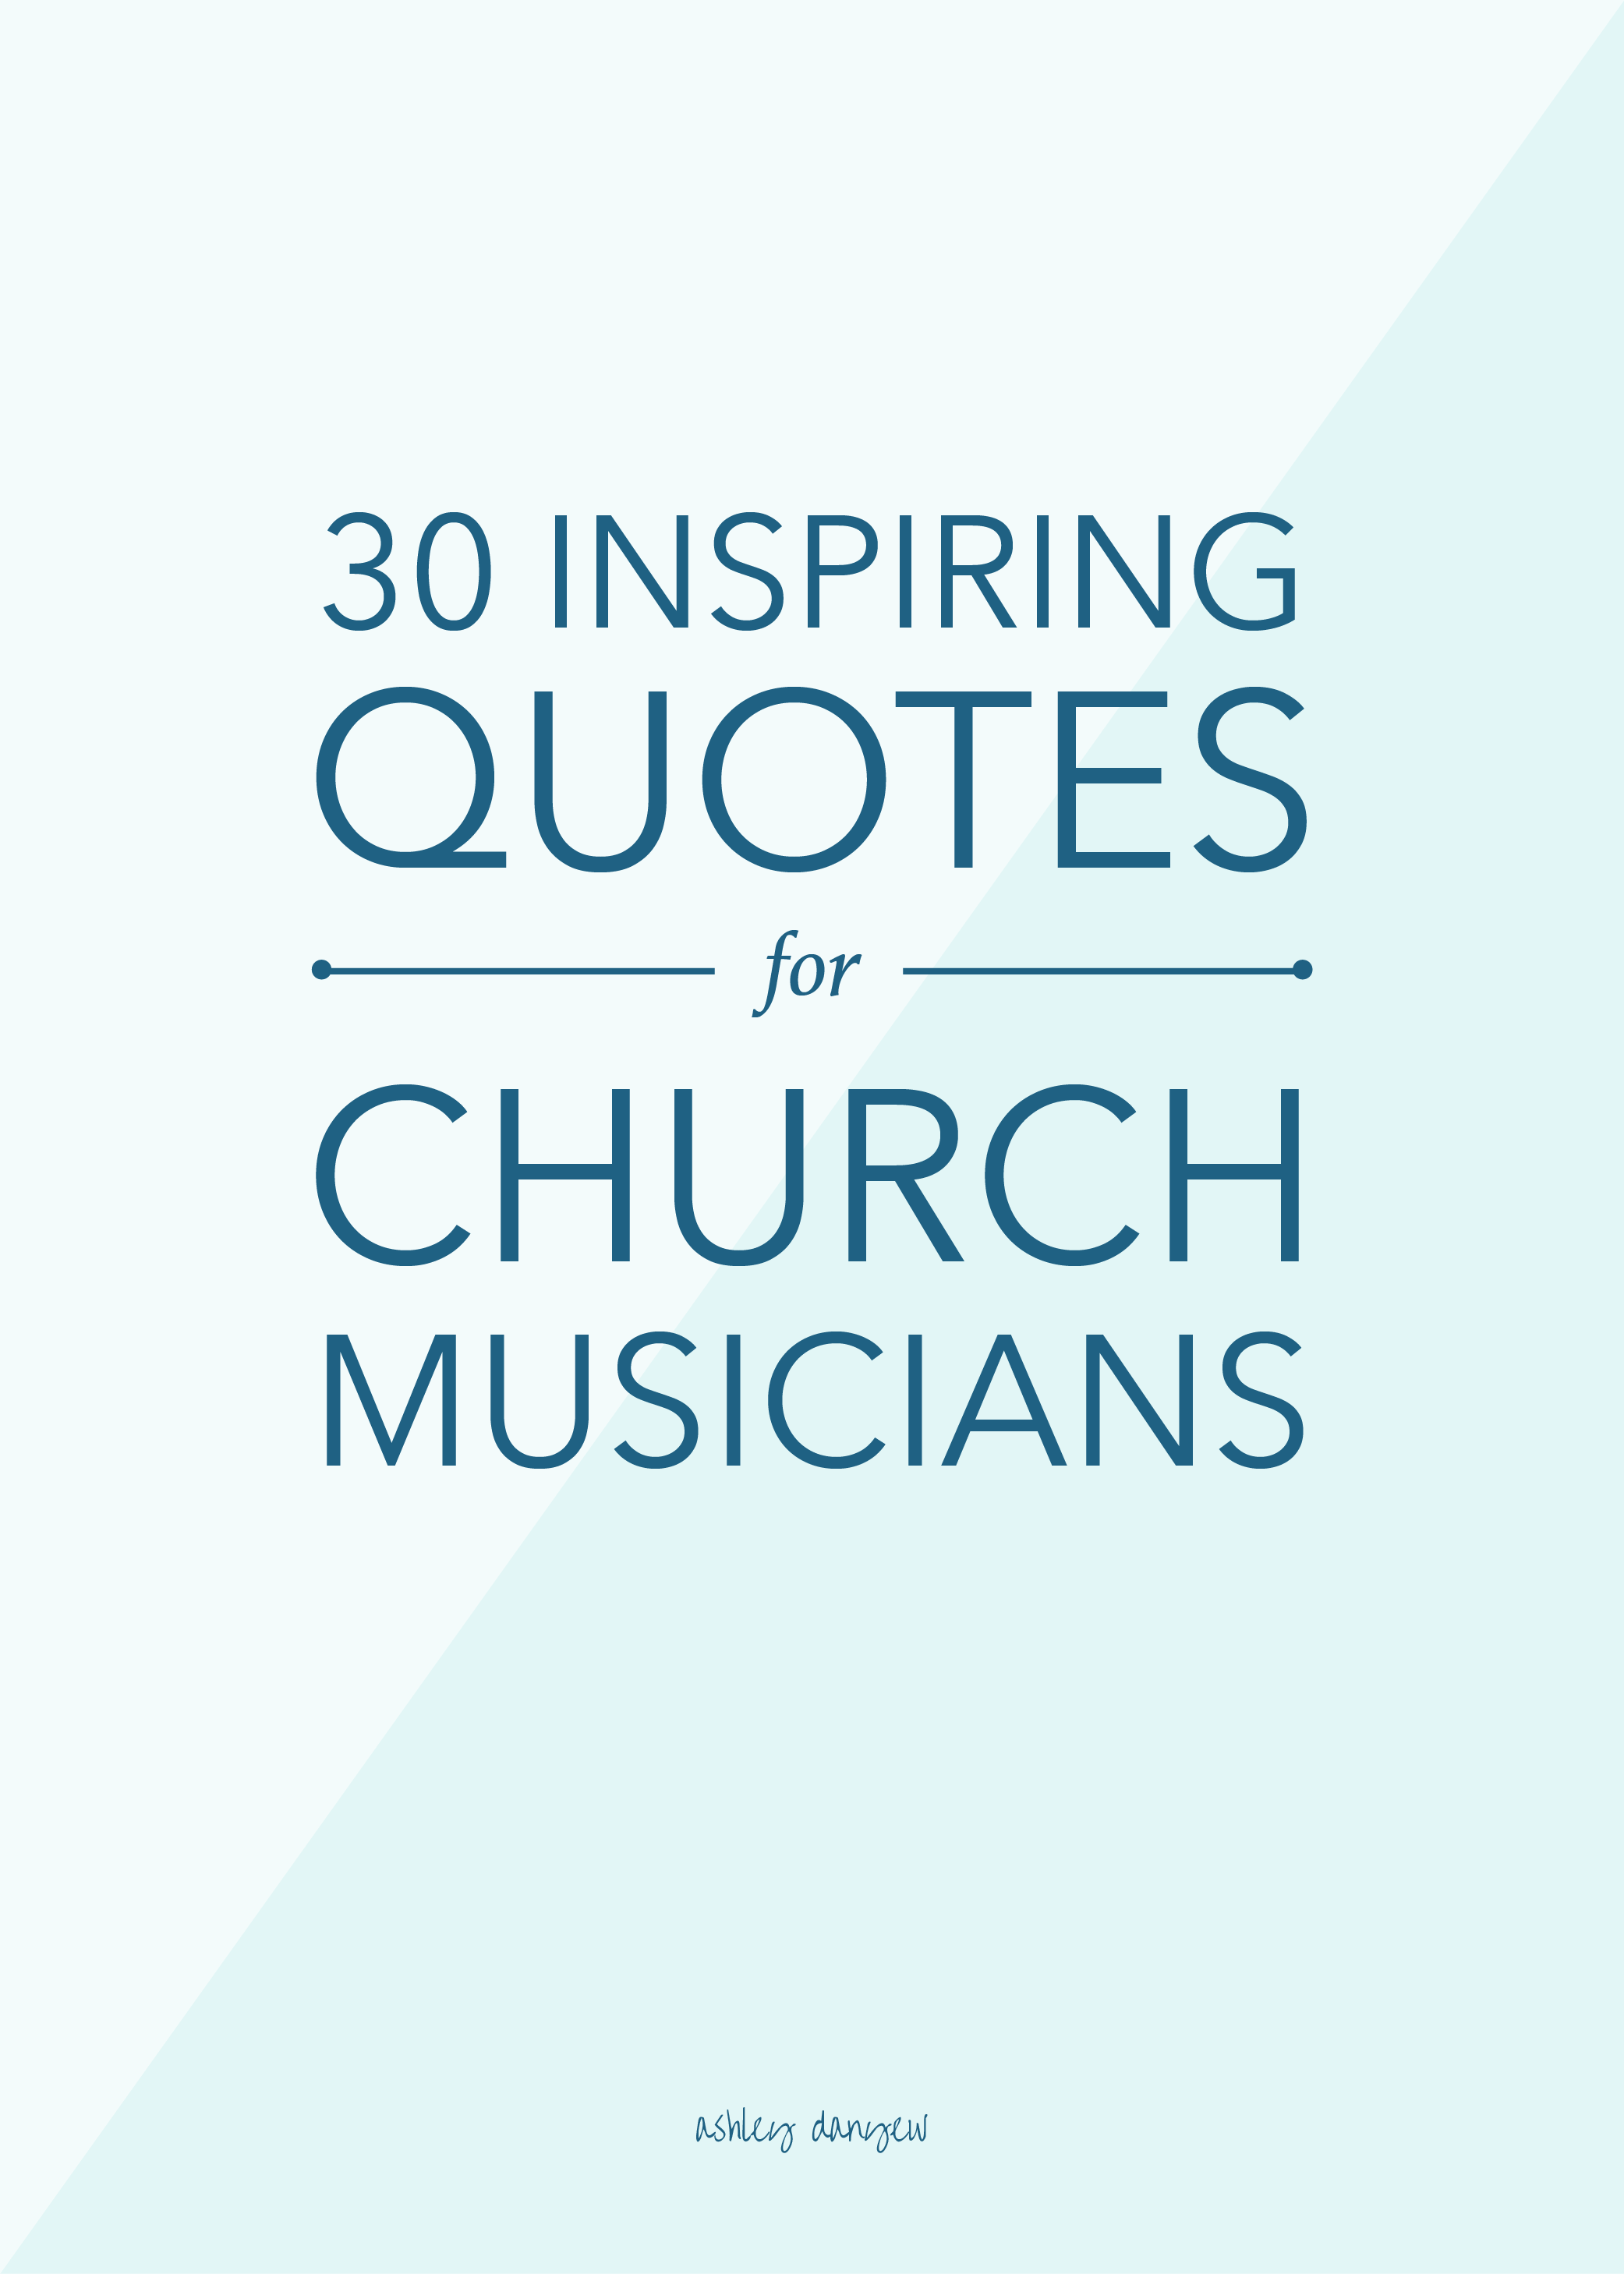 8 Inspirational Ministry Quotes